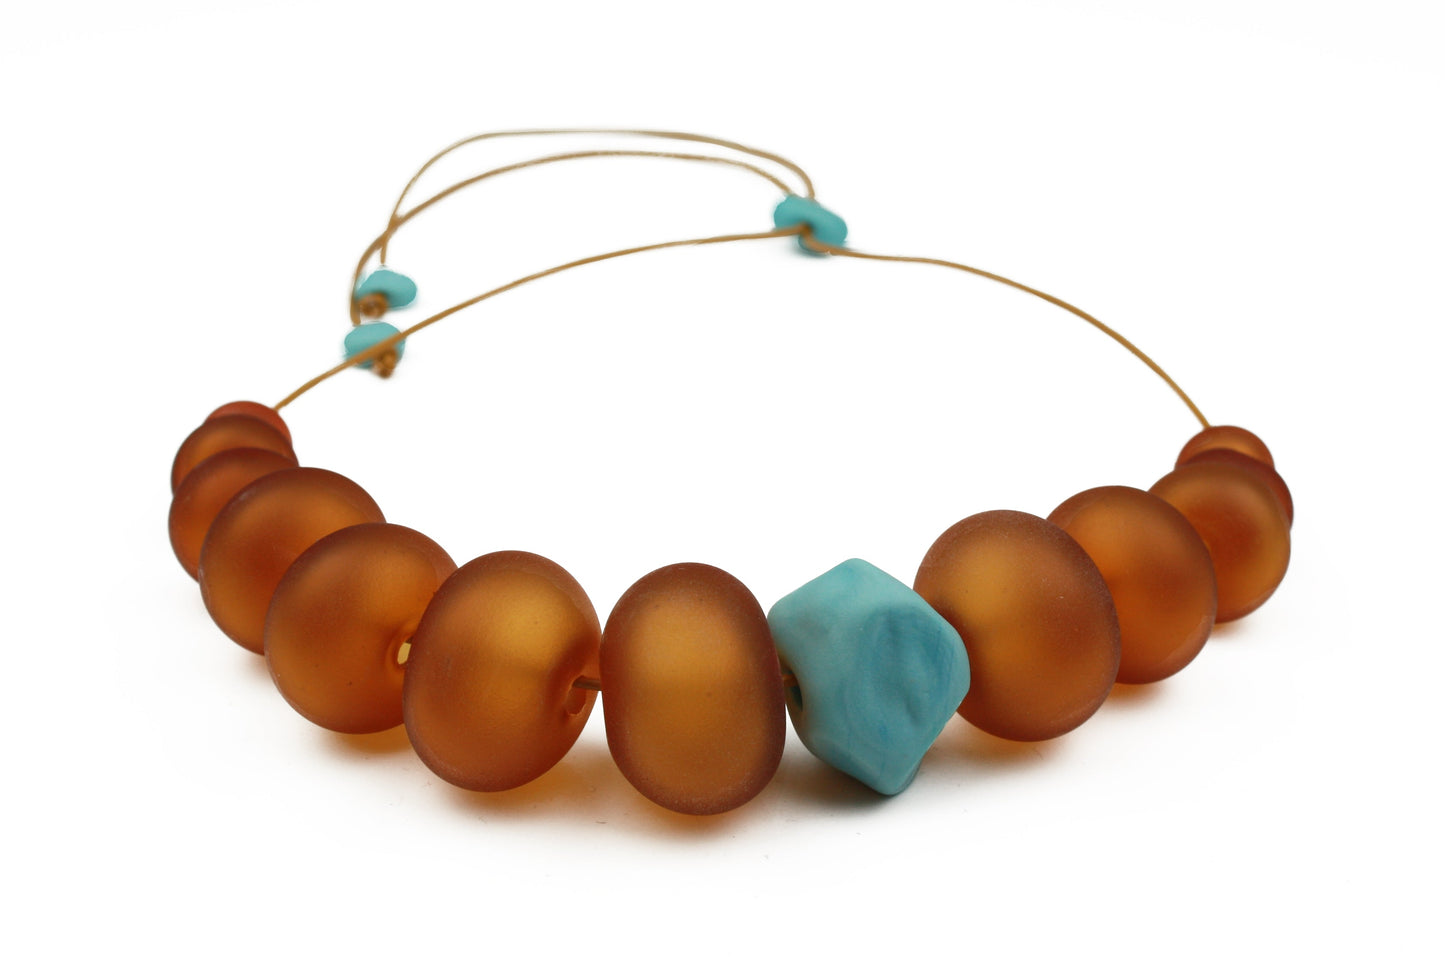 Necklace of hand blown and sandblasted hollow beads in velvety shades of amber glass paired with a turquoise glass nugget bead and strung on adjustable leather